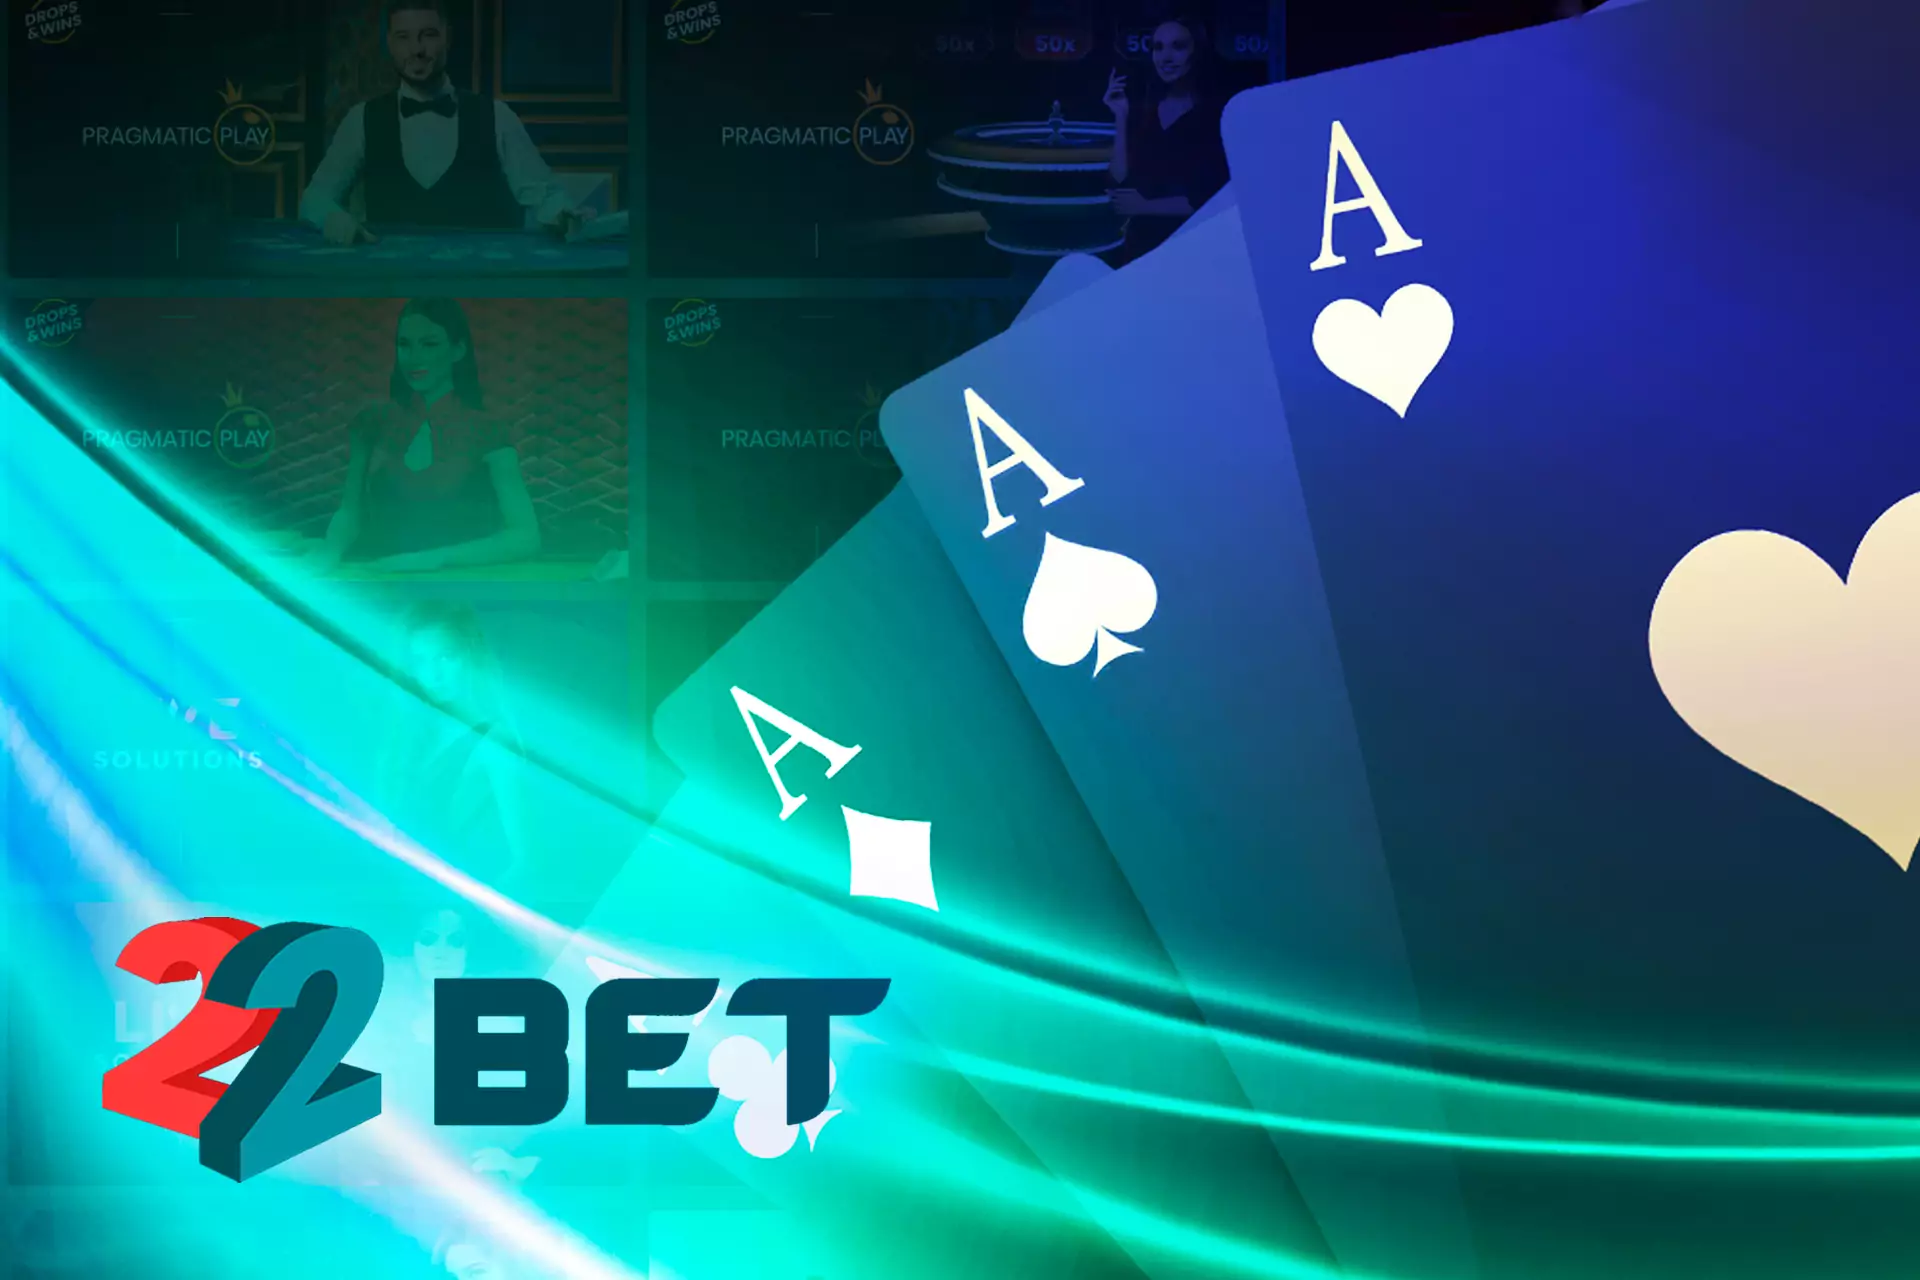 If you are a new user at 22bet, you can make a deposit into your account and get the 100% bonus of this amount.